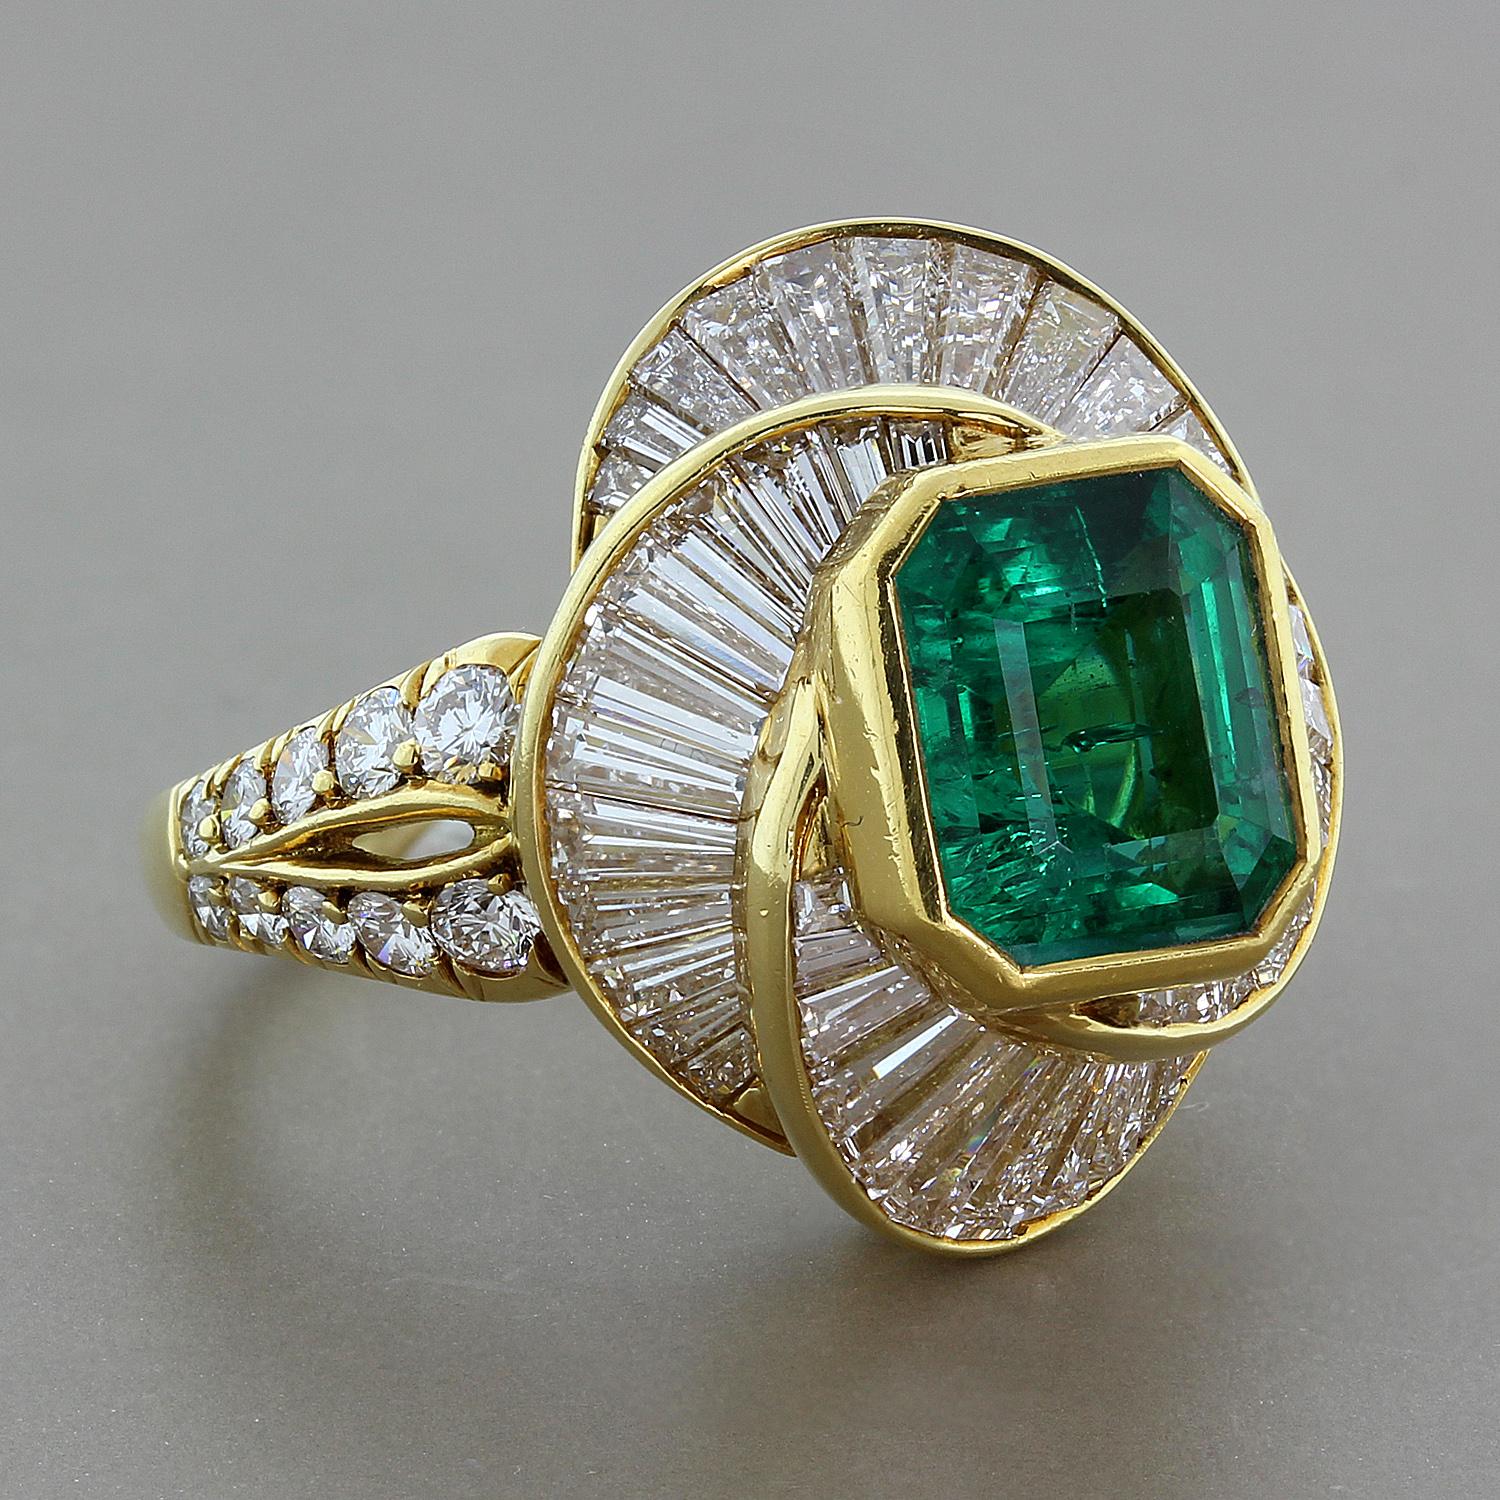 An estate sparkler with a 4.32 carat emerald cut emerald.  Bezel set and surrounded by a swirl of 4.70 carats of baguette cut diamonds and round cut diamonds on a split shank of 18K yellow gold.  Based on the vivid green color of the emerald, our in